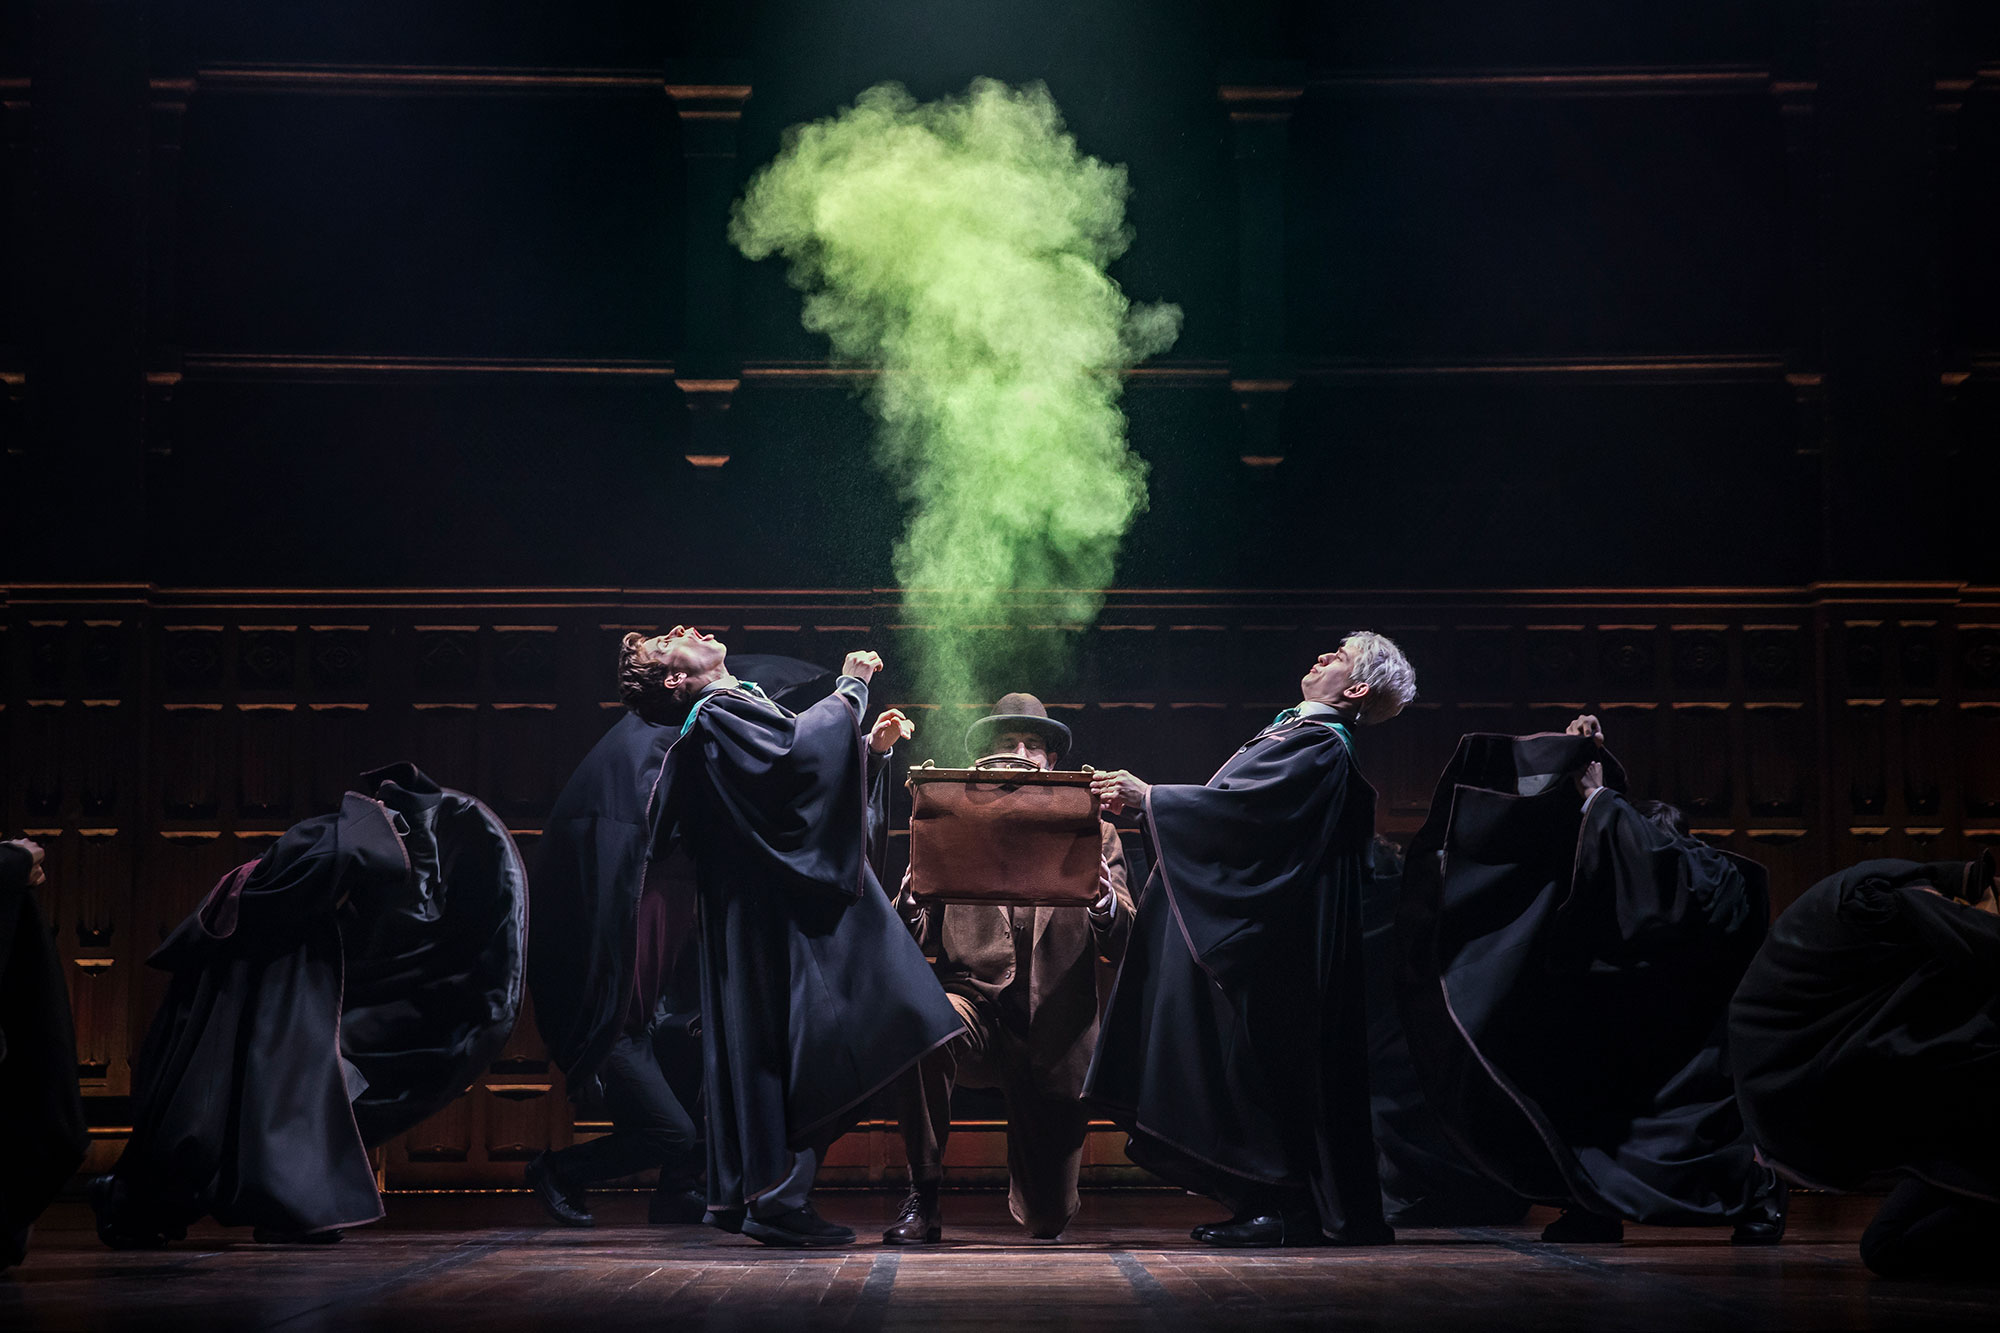 Learn more about Harry Potter and the Cursed Child